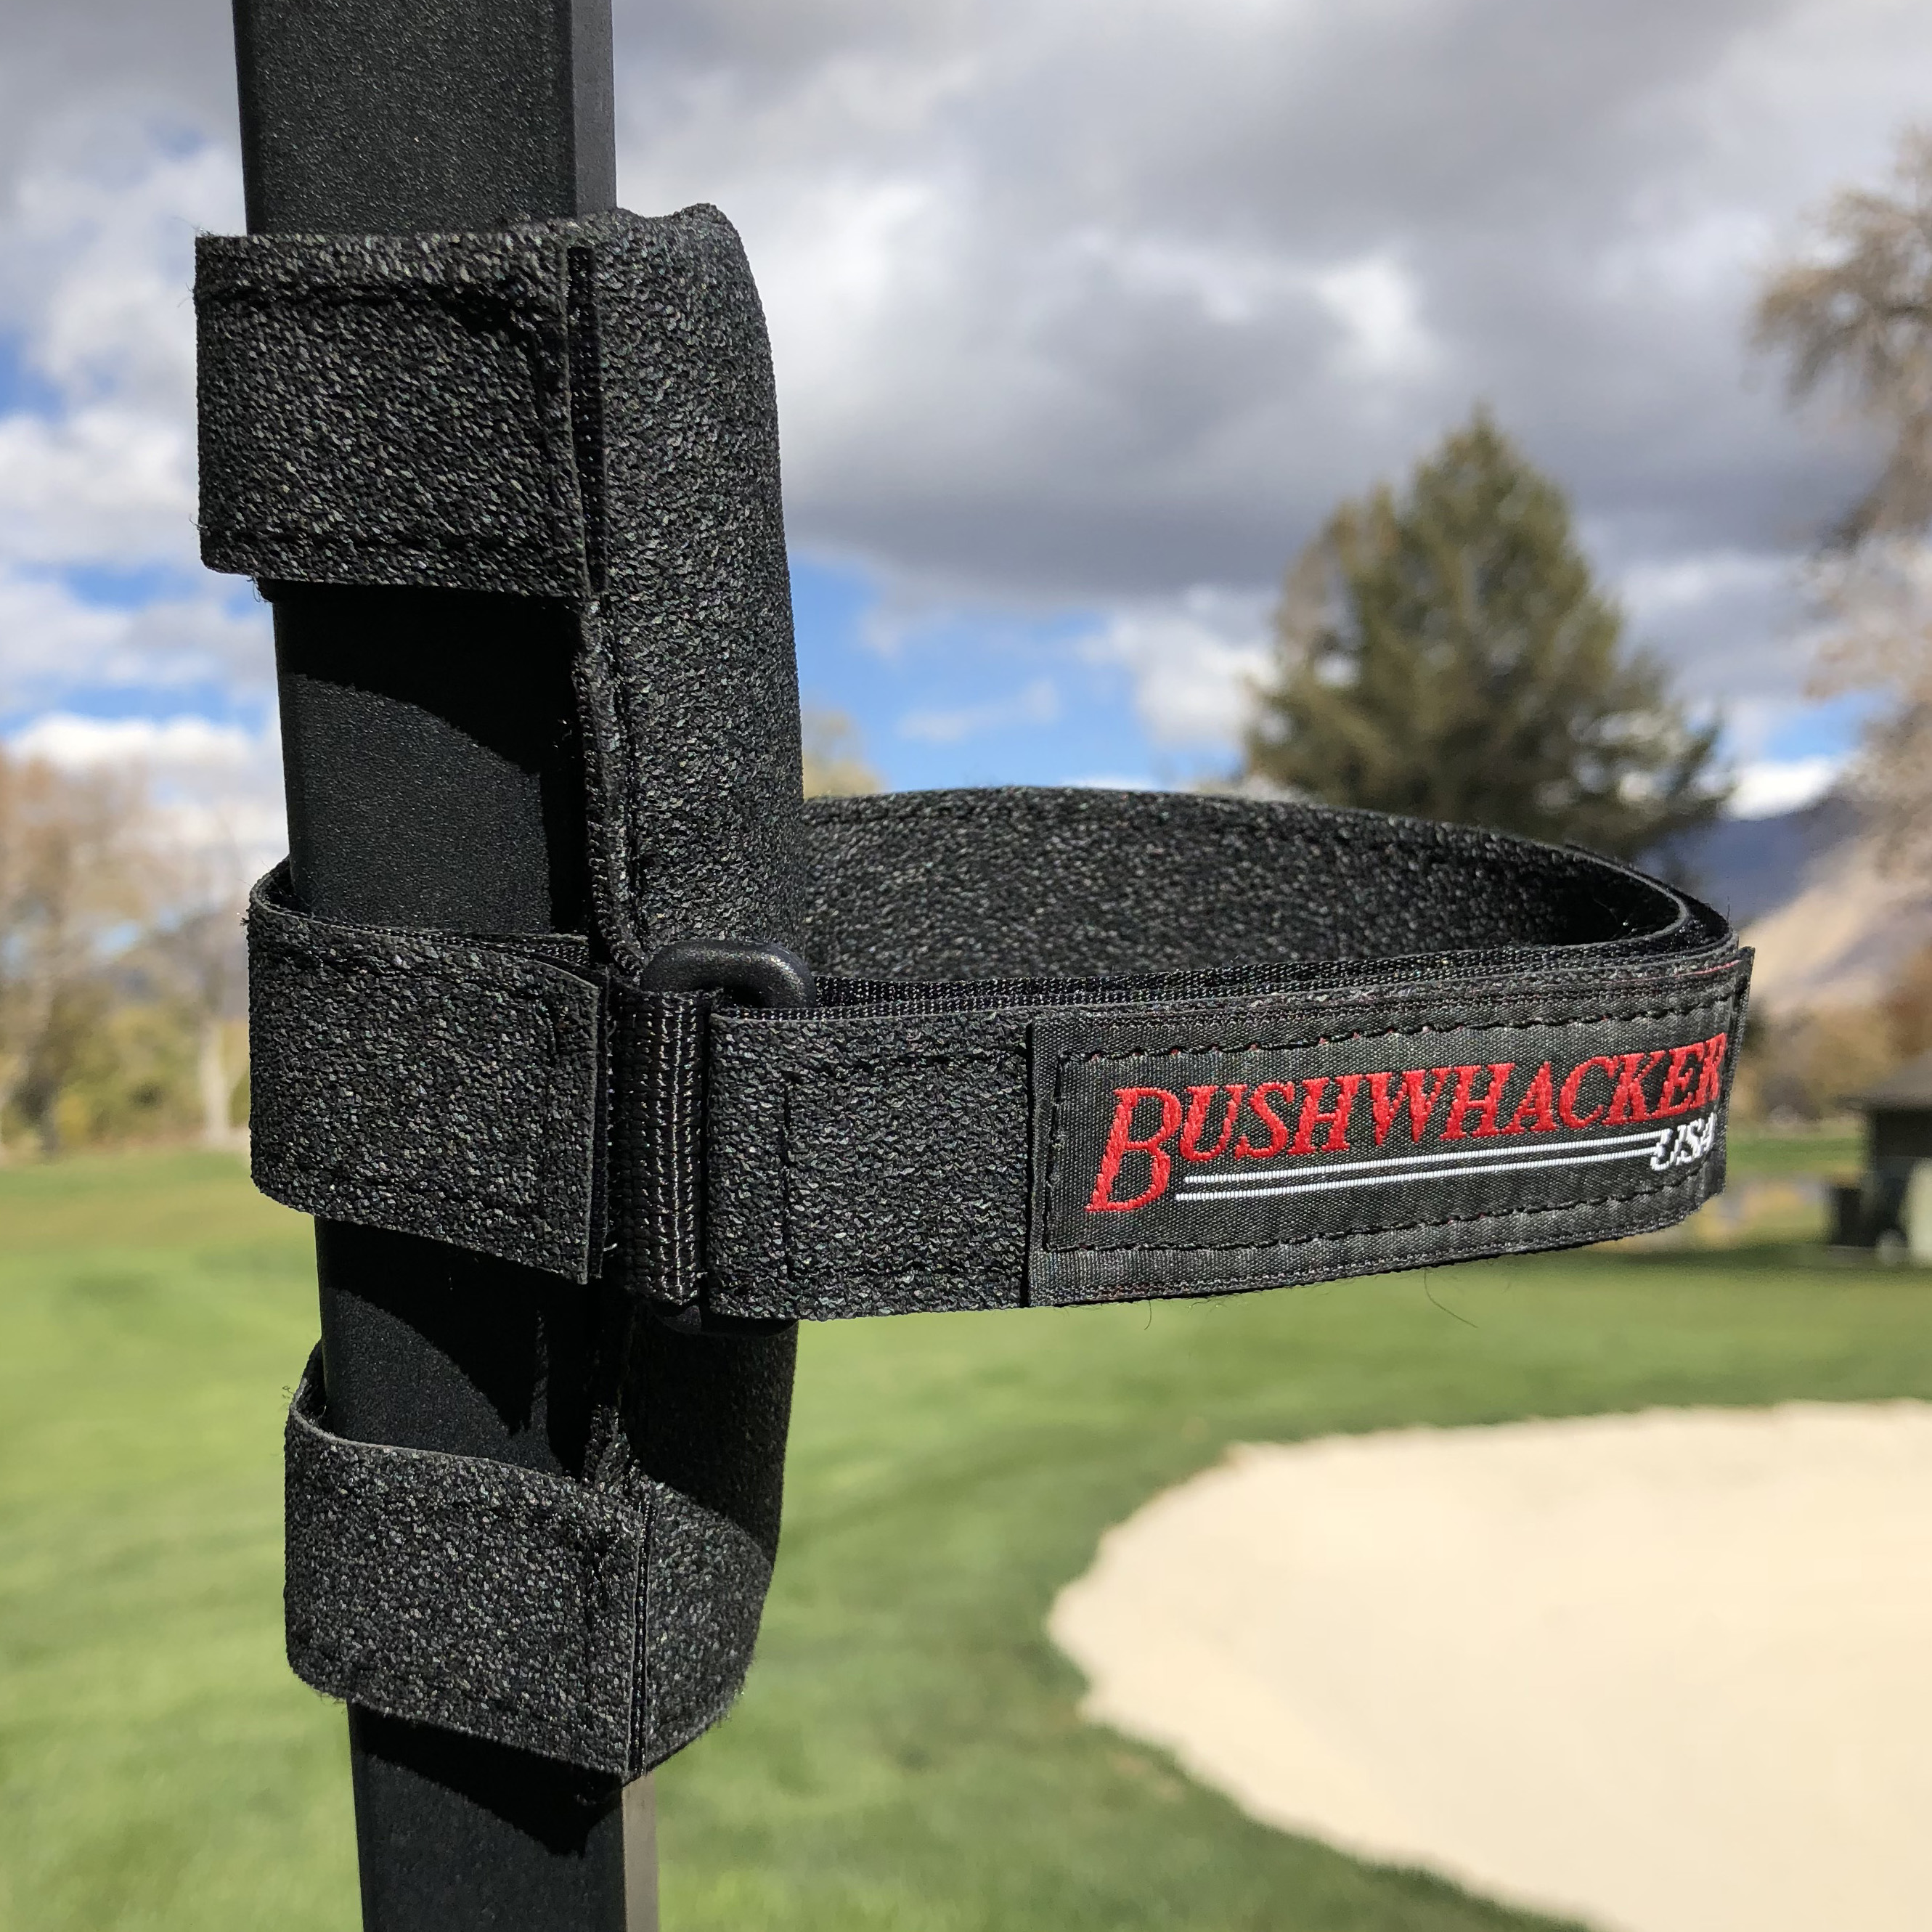 Bushwhacker The Original Portable Speaker Mount for Golf Cart Railing - Adjustable Strap Fits Most Bluetooth Wireless Speakers Attachment Accessory Holder Bar Rail - image 2 of 6